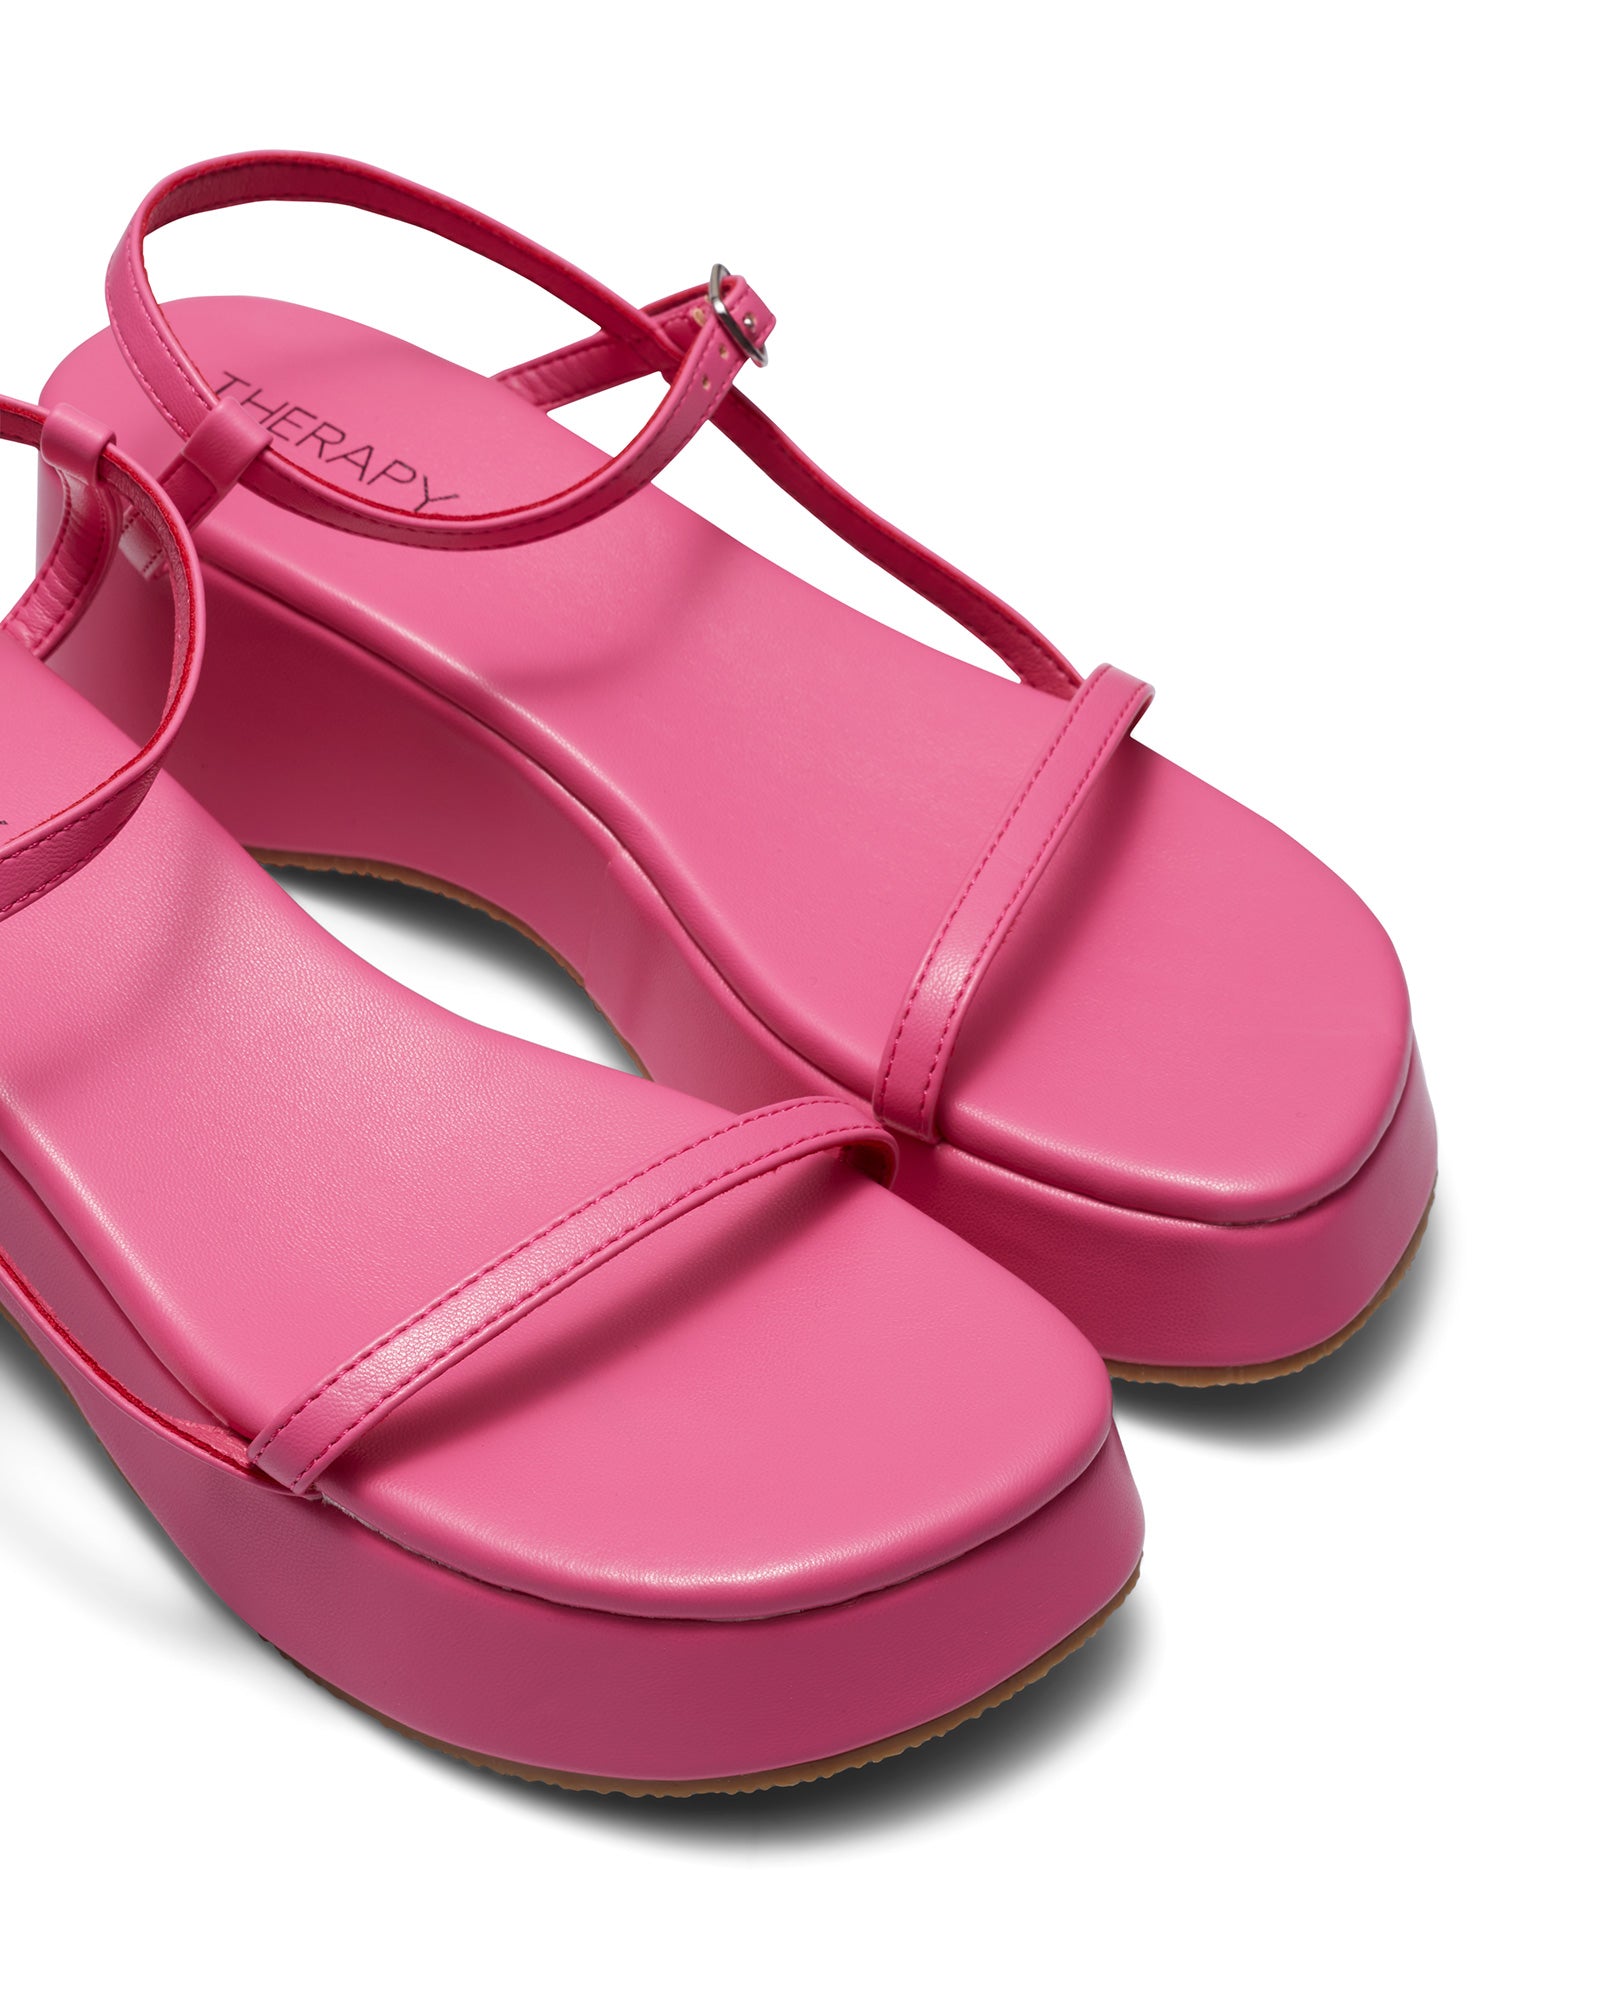 Therapy Shoes Claudia Pink | Women's Sandals | Platform | Flatform | Strappy